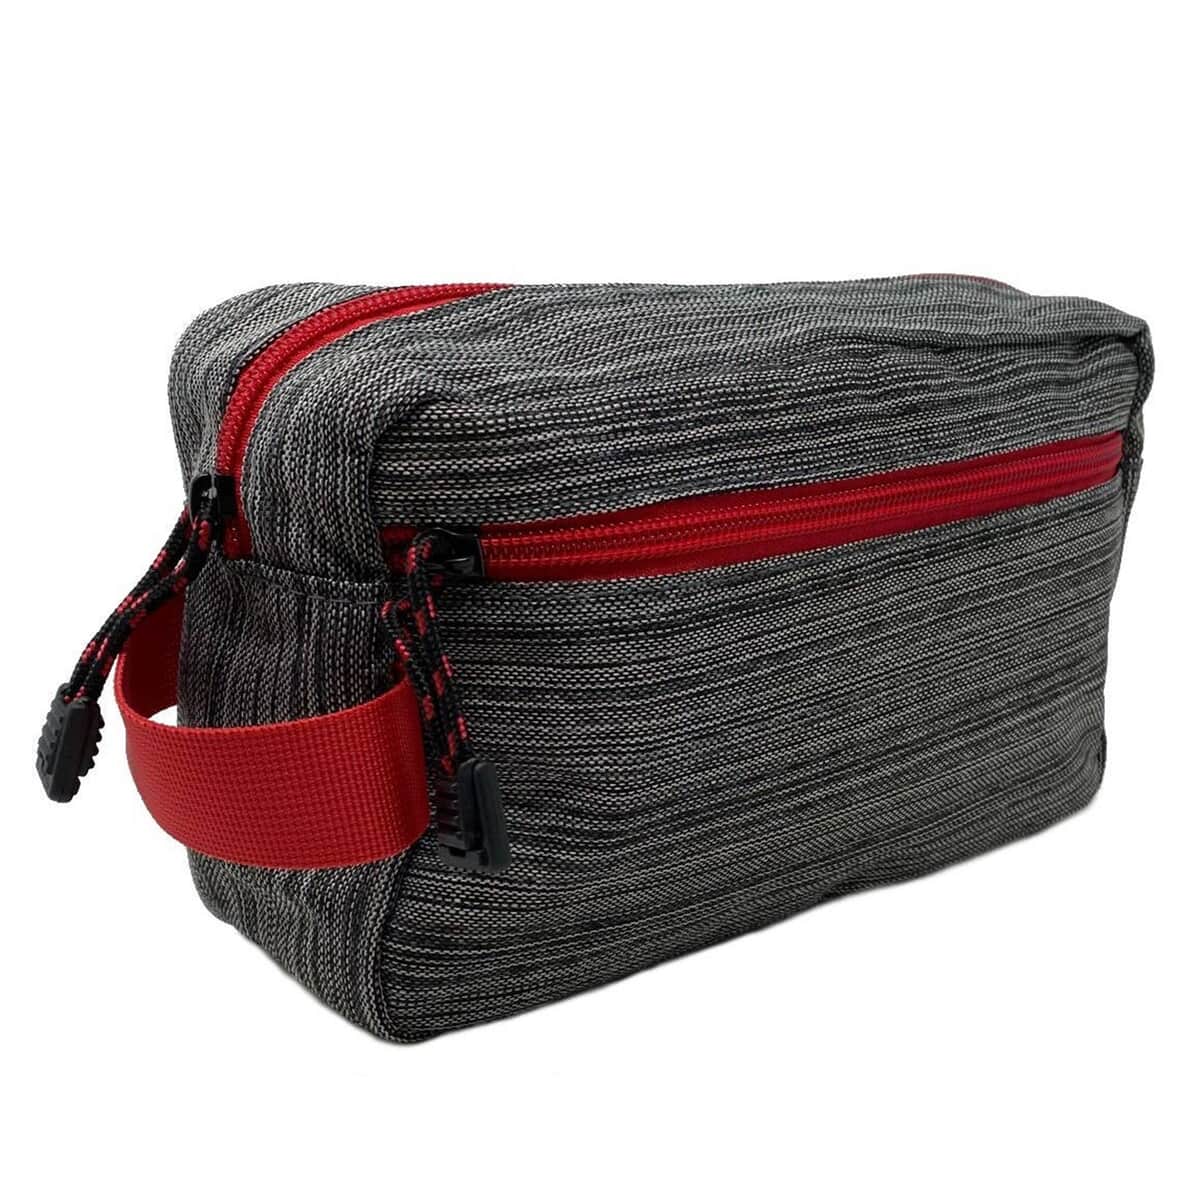 Gray and Red Canvas Textured Dopp Kit With Red Zipper, Men's Dopp Kit Bag, Best Dopp Kit, Travel Organizer for Accessories and Toiletries, Men's Toiletry Bag image number 0